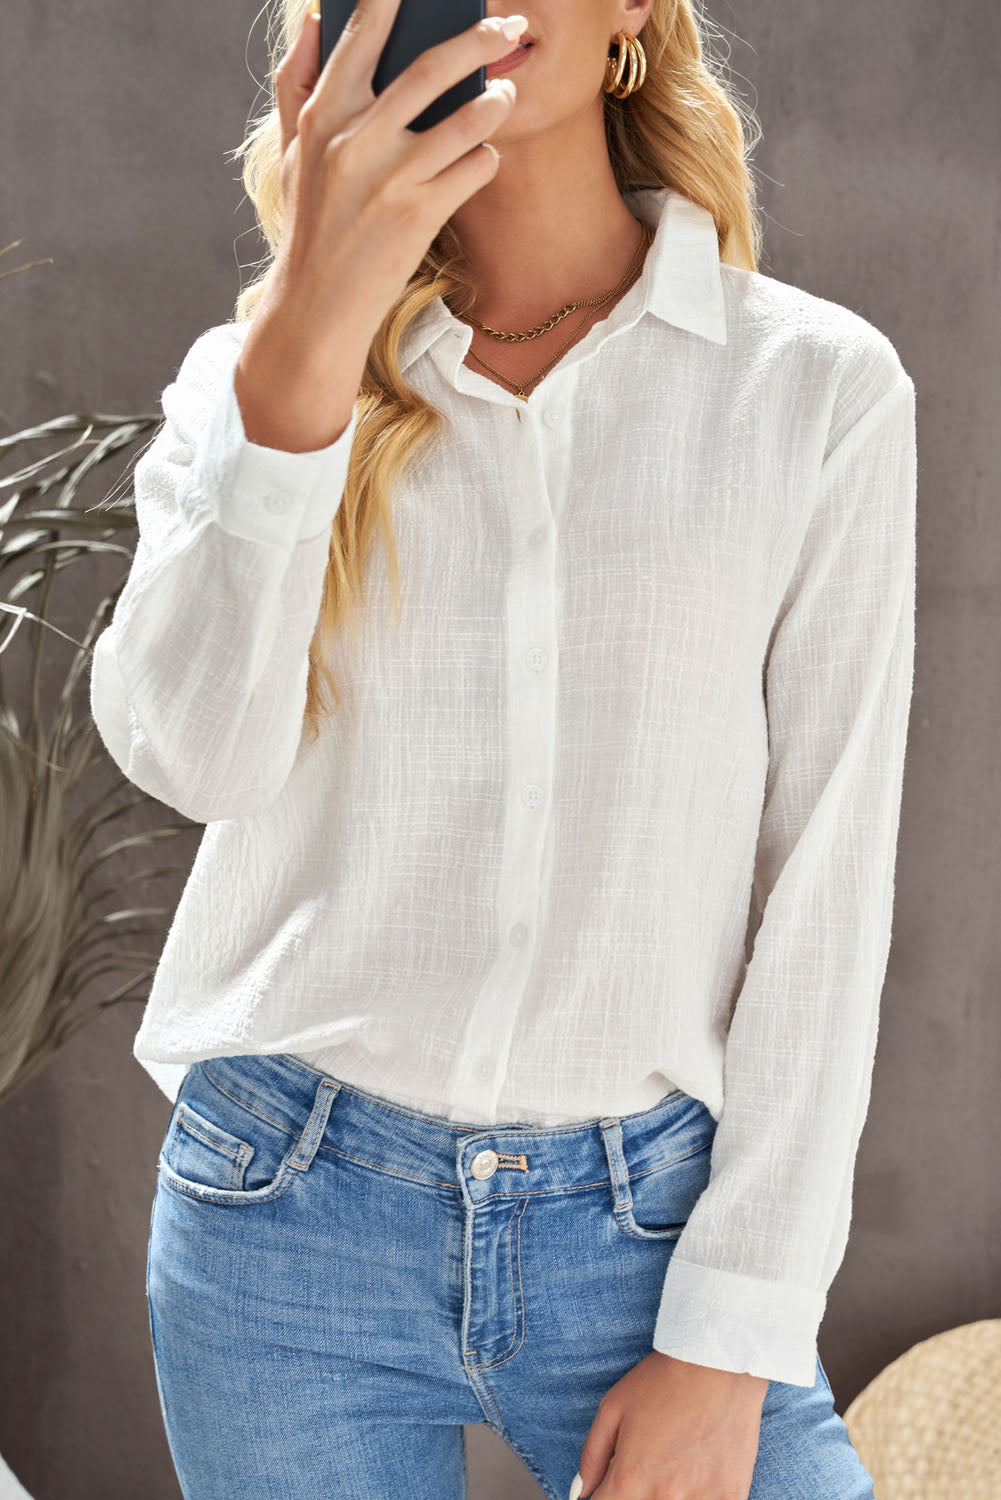 Womens White Textured Solid Color Basic Shirt